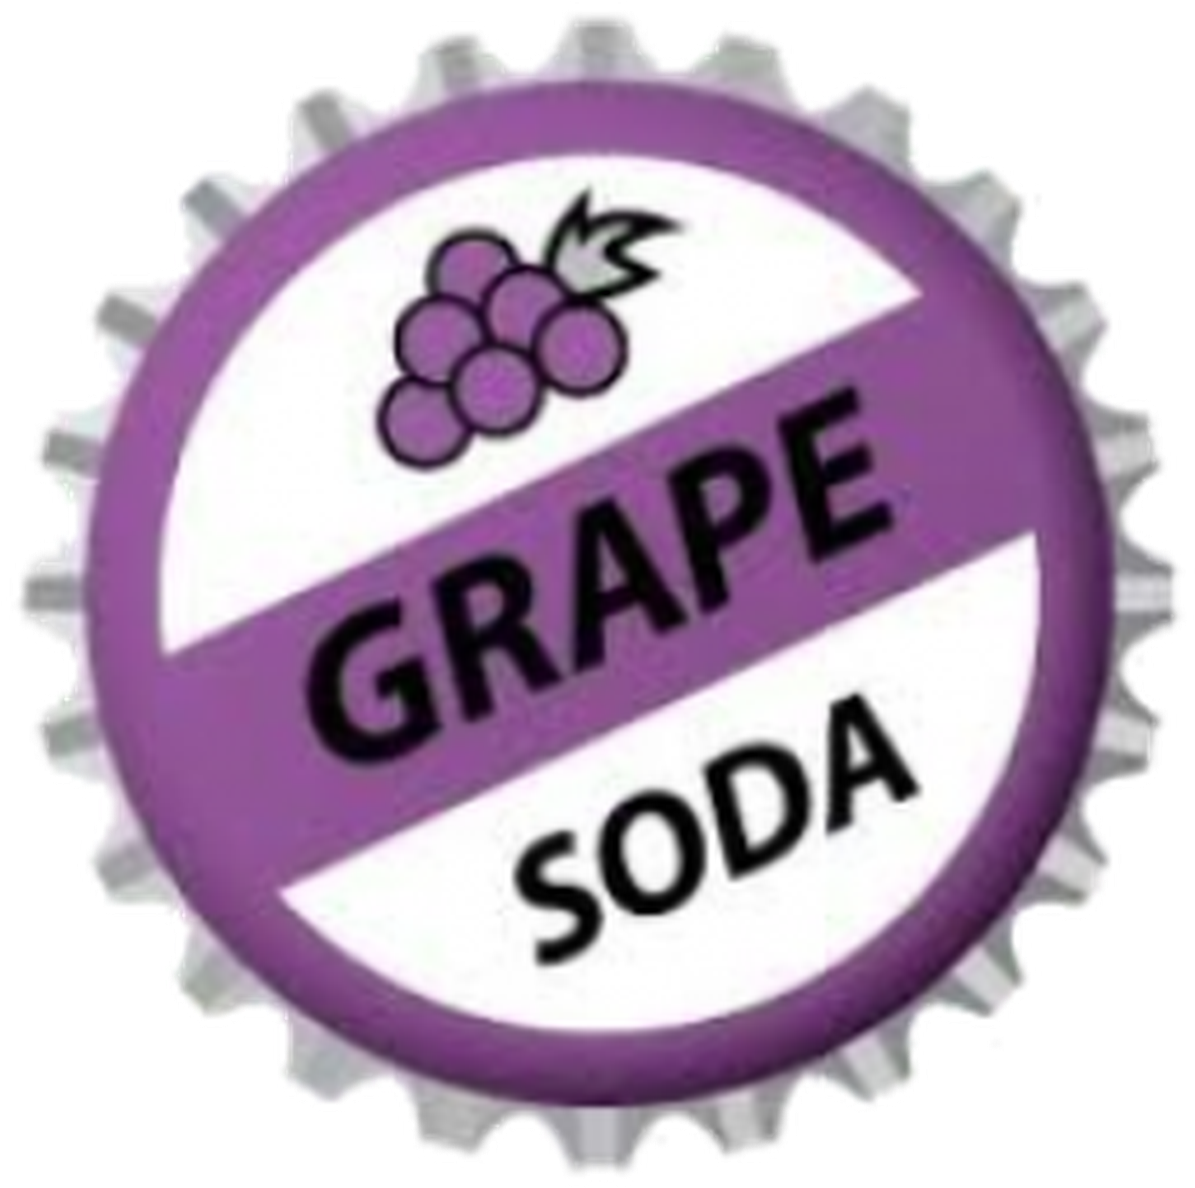 Grape Soda Bottle Cap Png Grape Soda Bottle Cap - Russell Up Grape Soda (1292x1292), Png Download